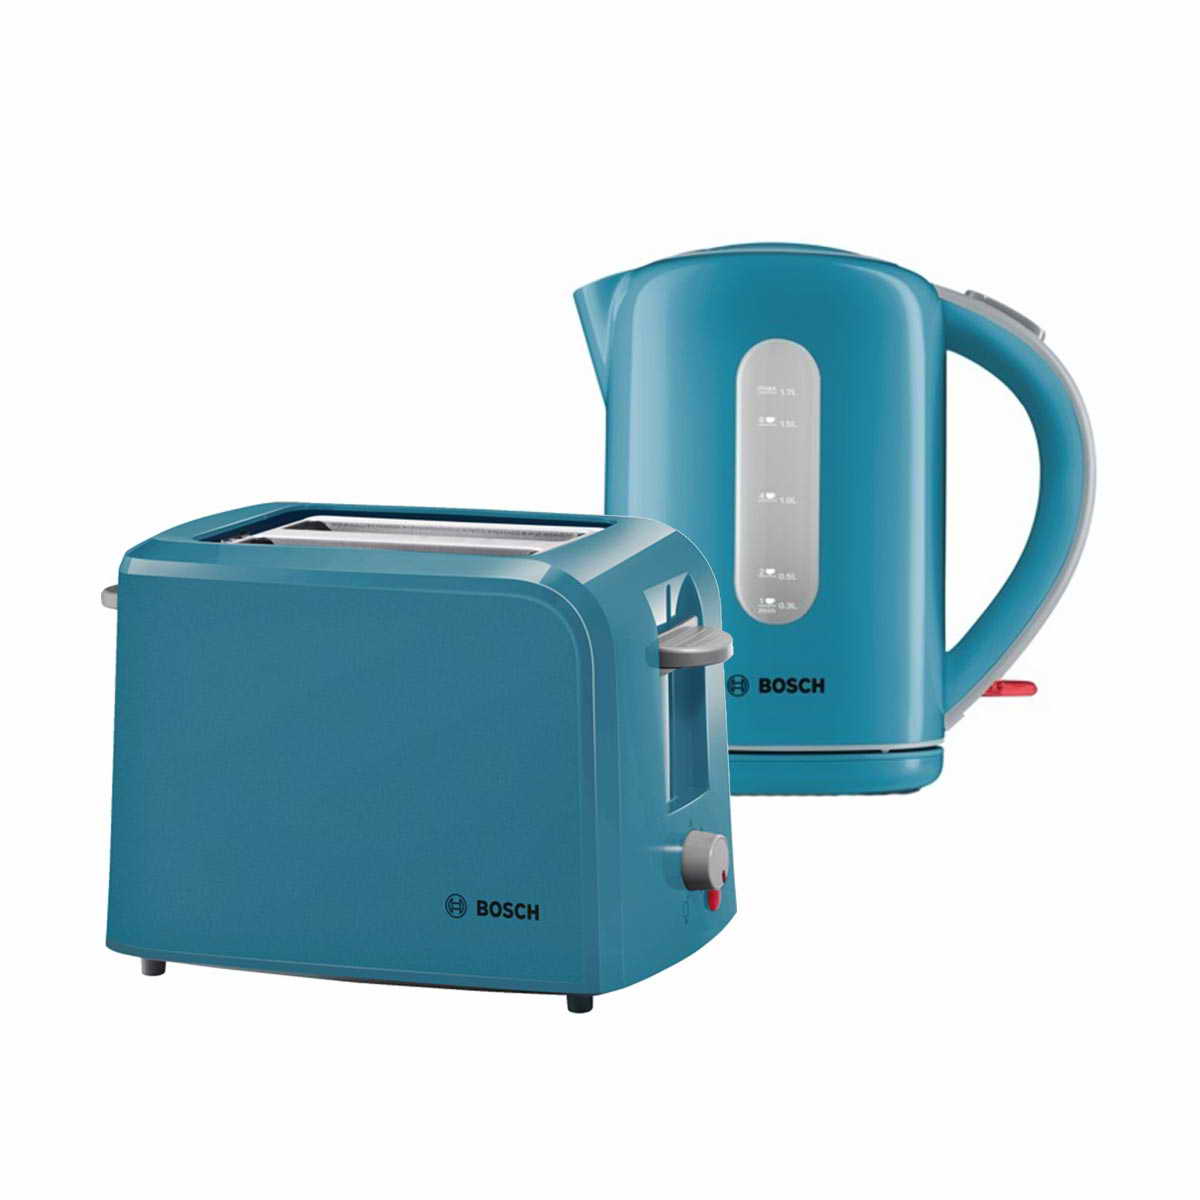 Bosch Village Collection Kettle and Toaster Bundle Cream